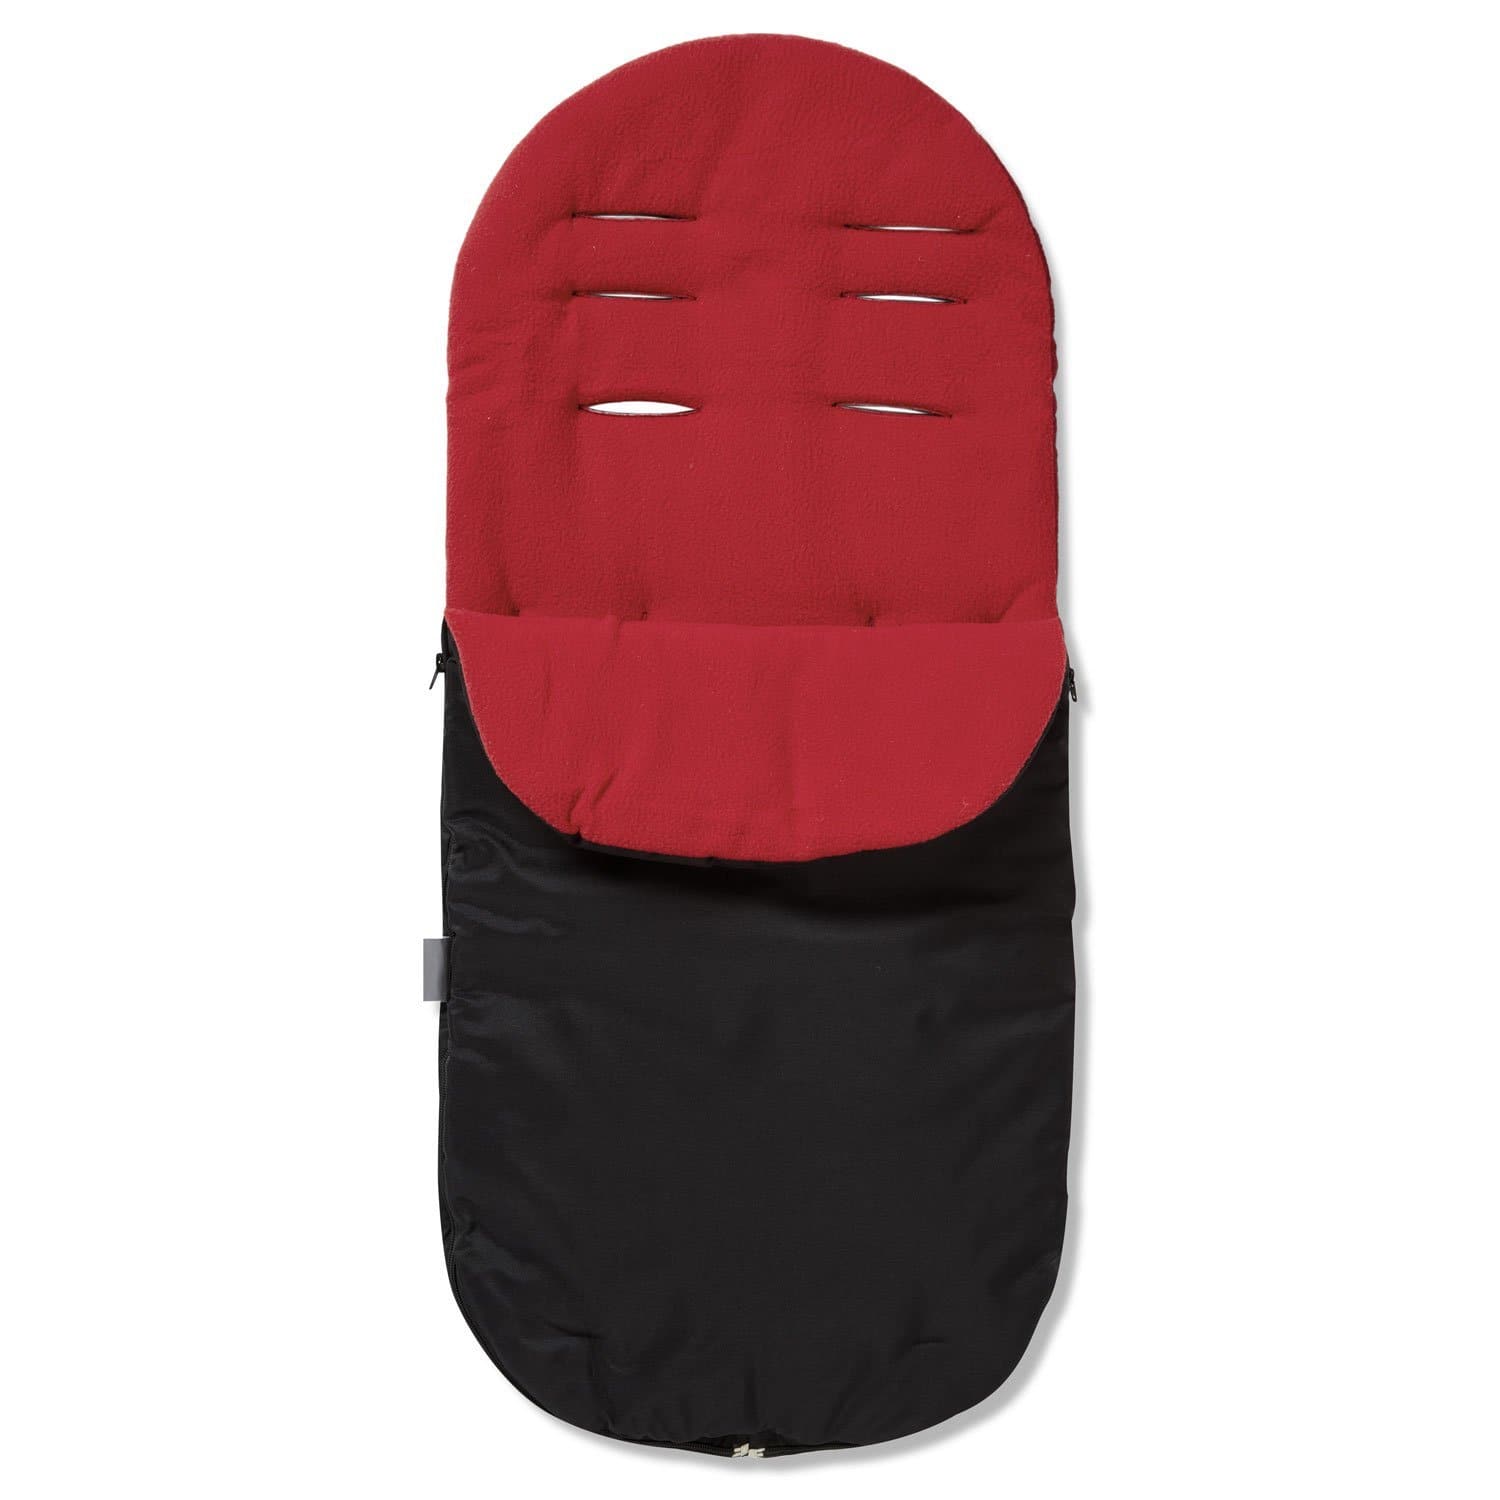 Footmuff / Cosy Toes Compatible with Britax - Red / Fits All Models | For Your Little One